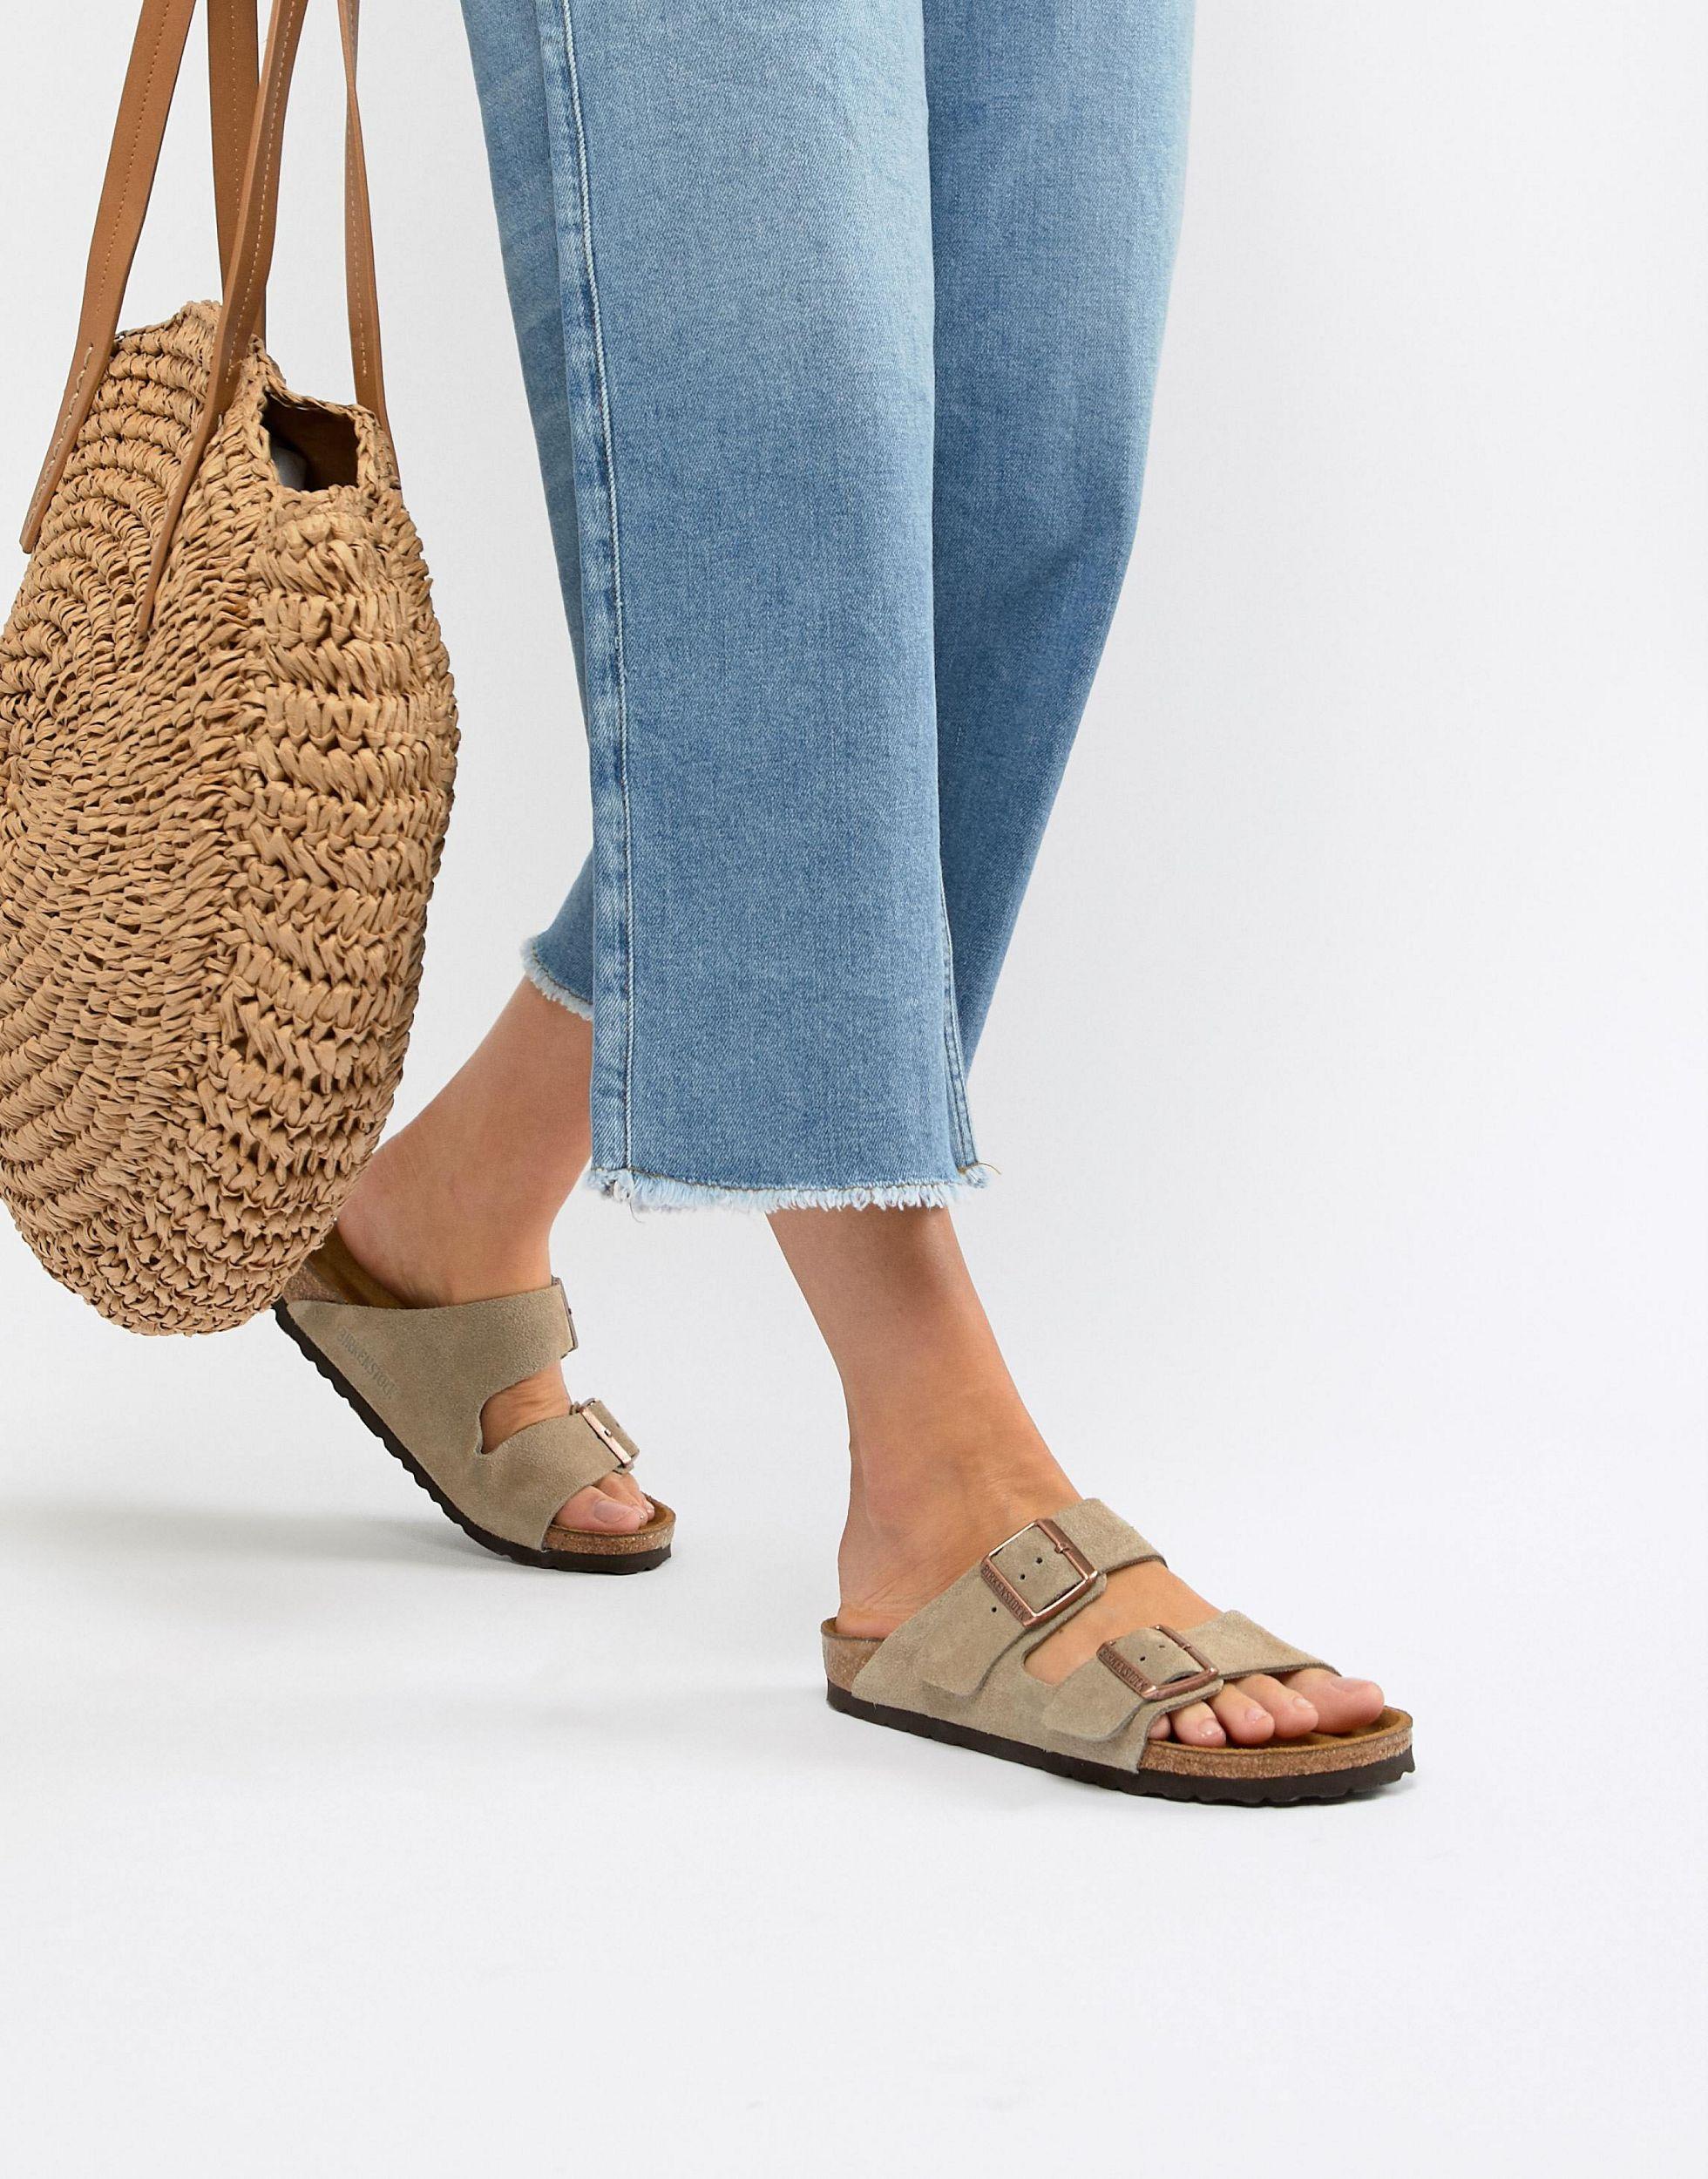 Birkenstock Arizona Taupe Suede Fit Flat Sandals in Natural | Lyst UK